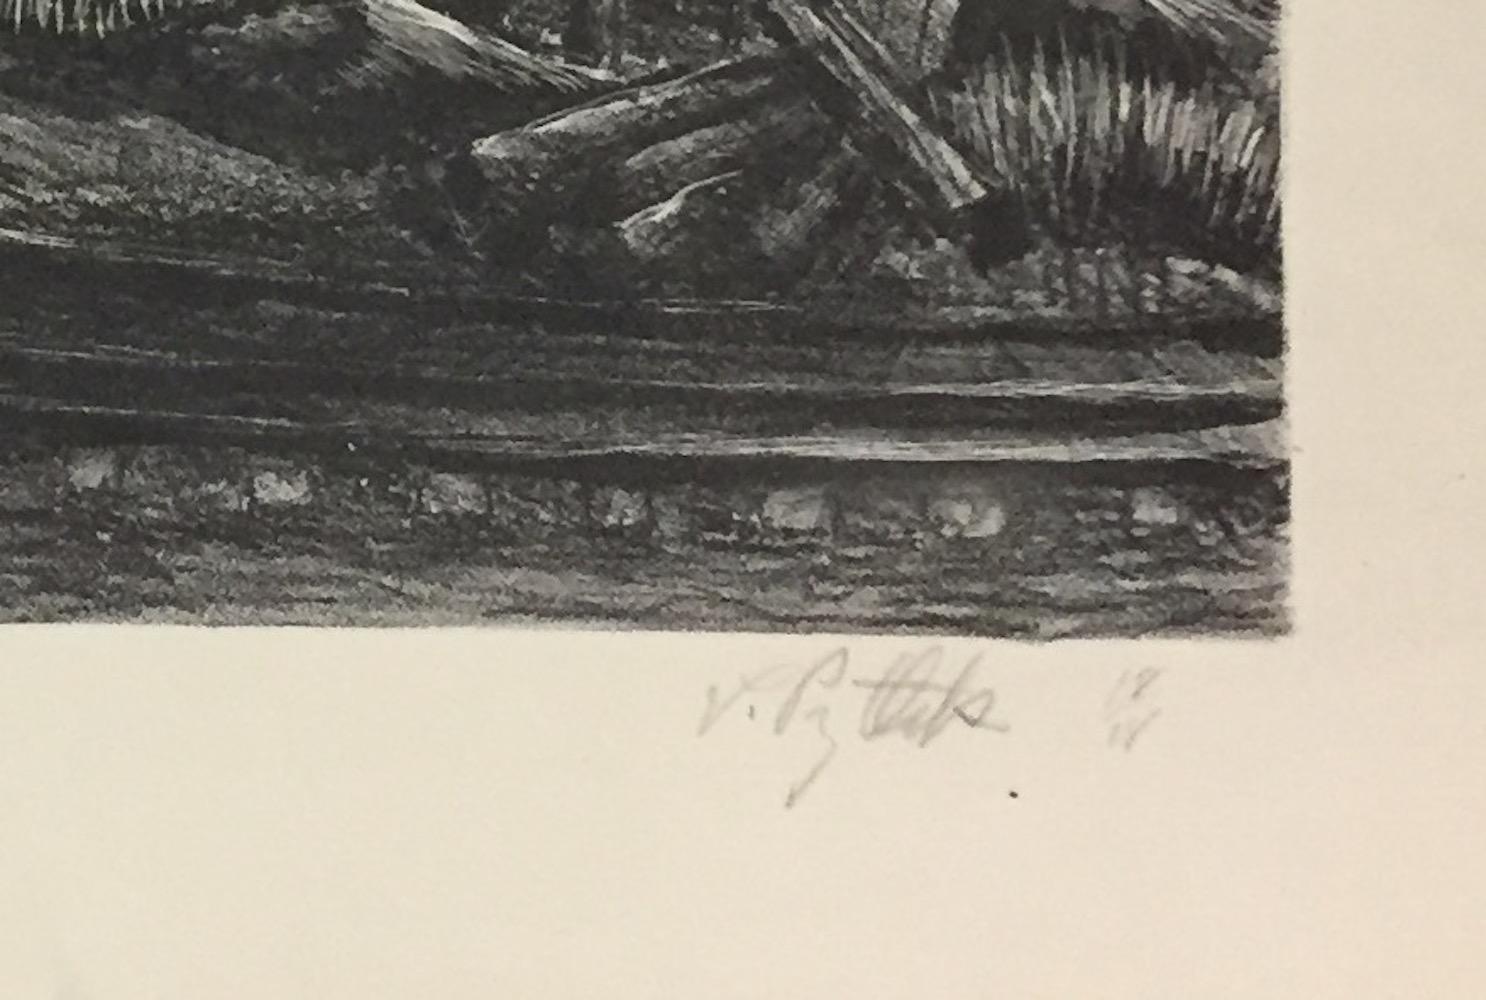 This lithograph is signed and number in pencil. It is numbered 18/18 indicating there were 18 impressions of this subject printed.

